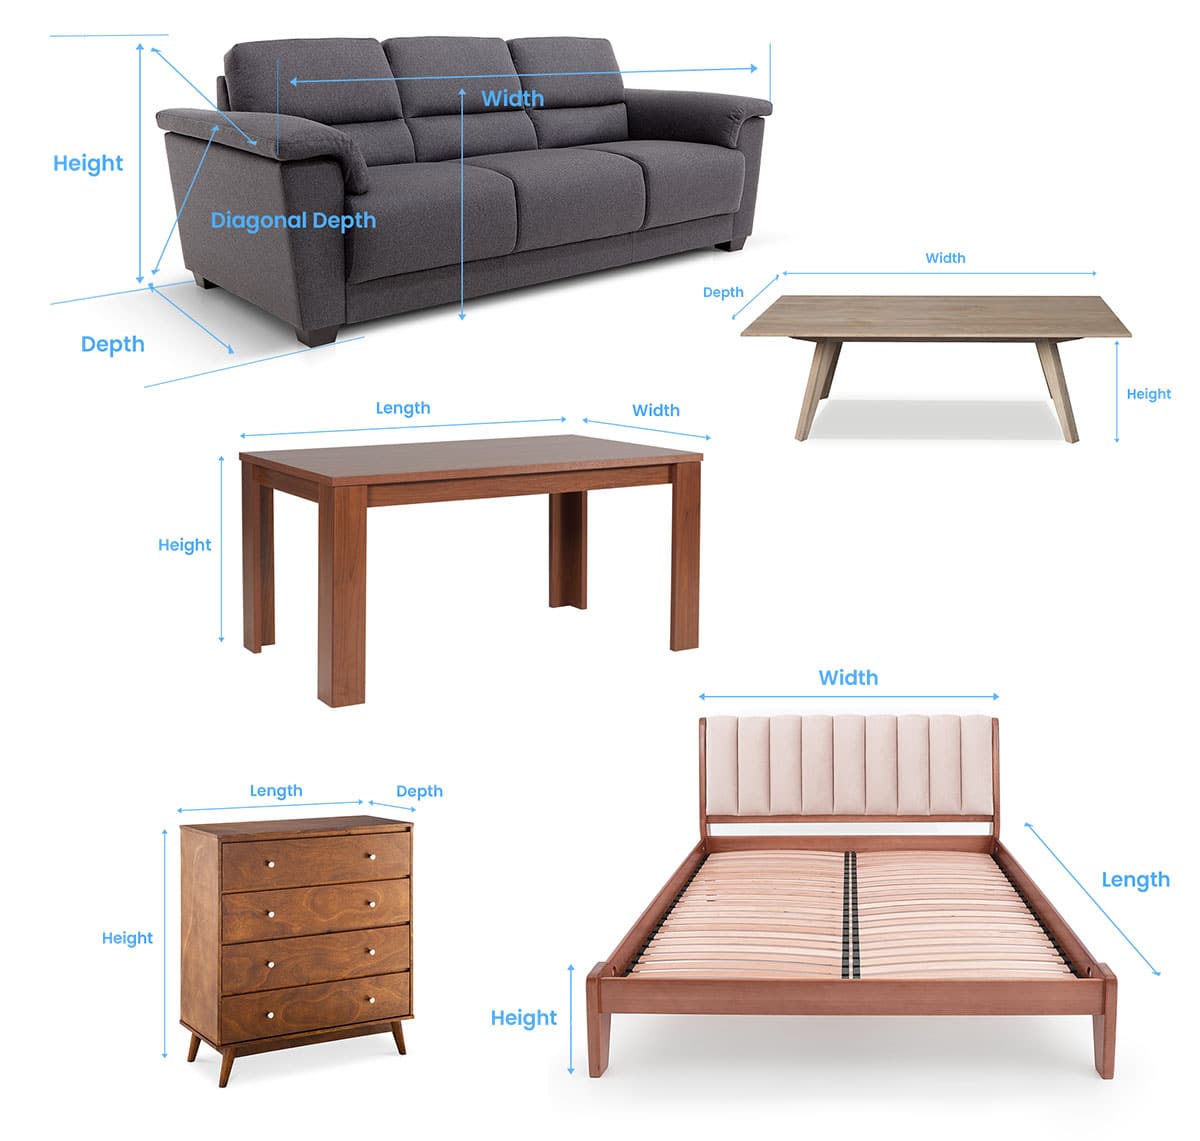 How to measure furniture